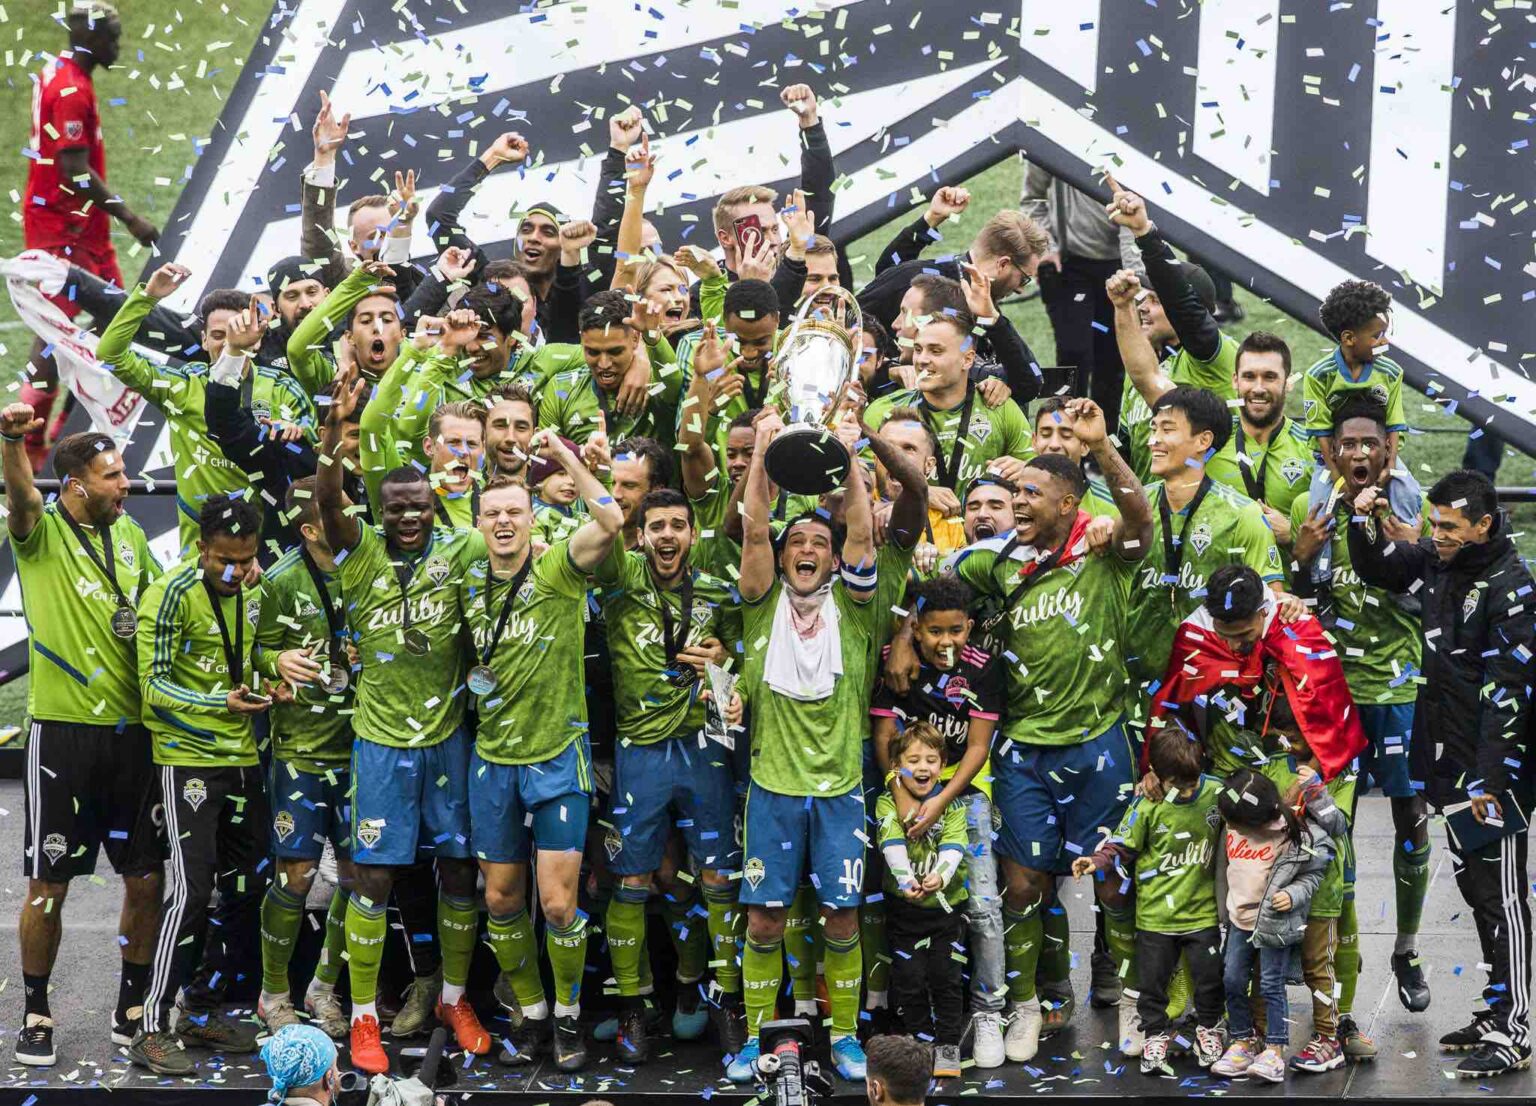 A new year brings a new look to the MLS, but one team will still be crowned champion. Find out here who'll top the MLS playoffs this season.